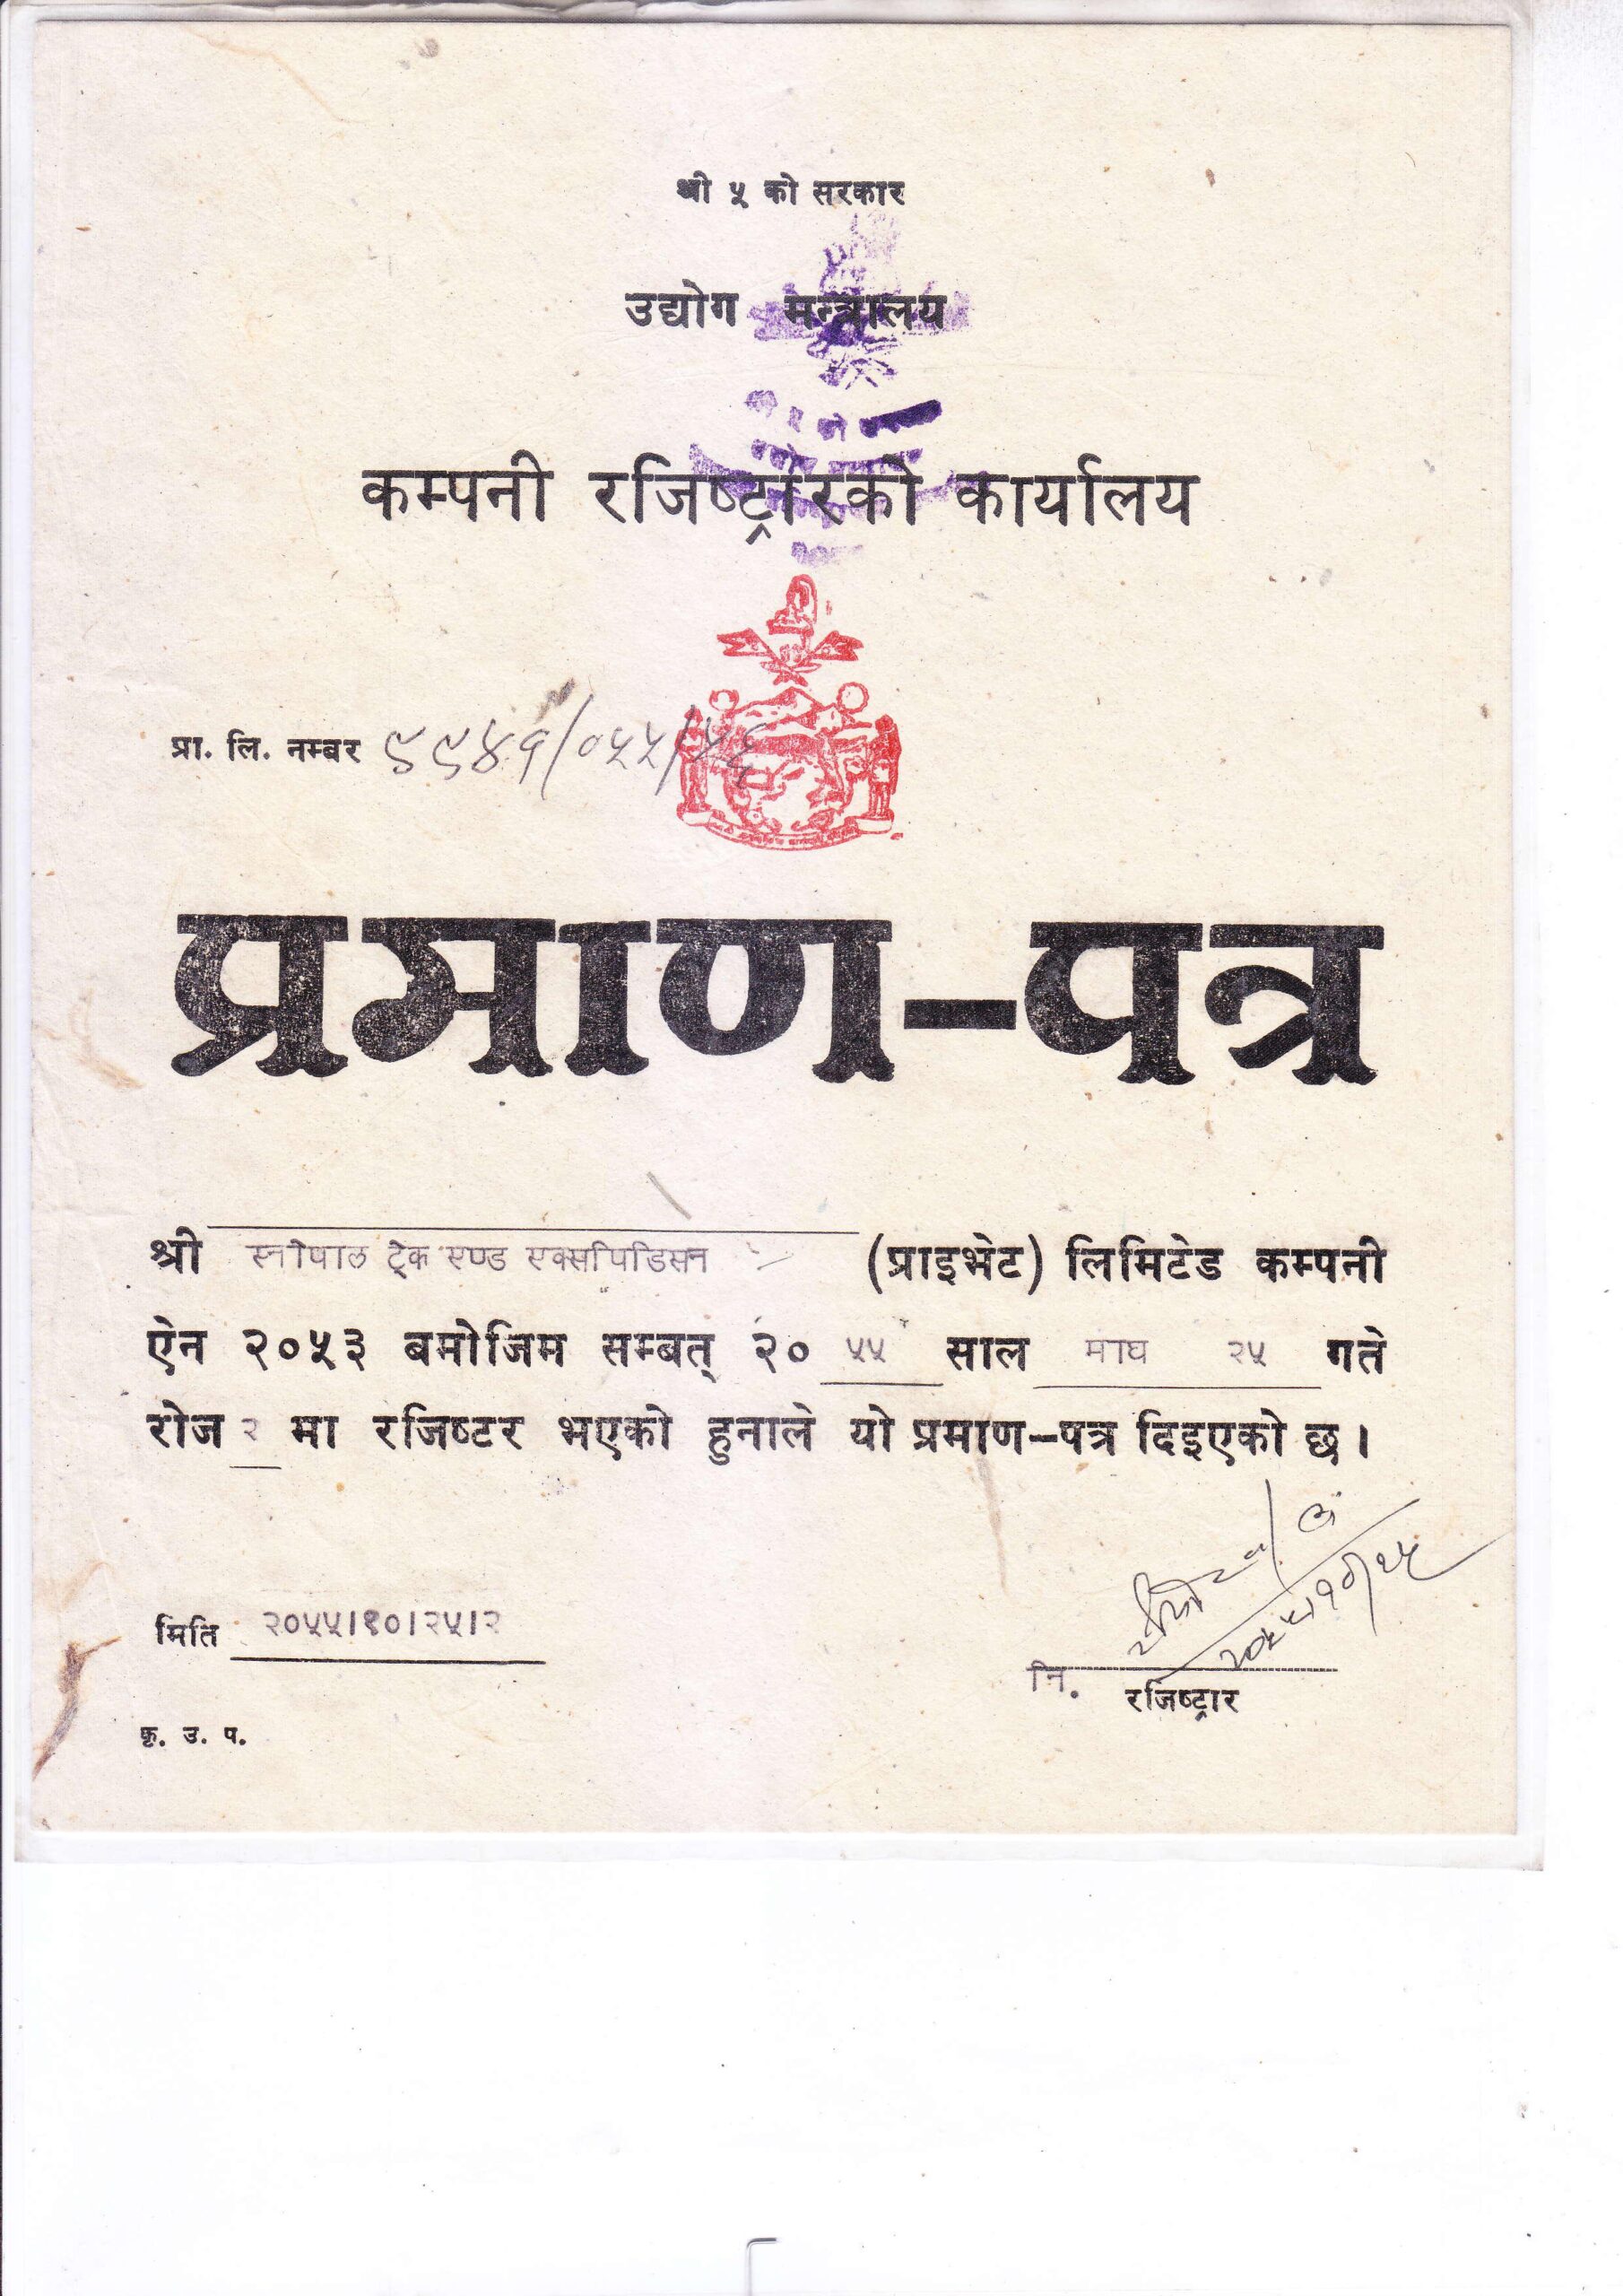 Certificate of Company Register